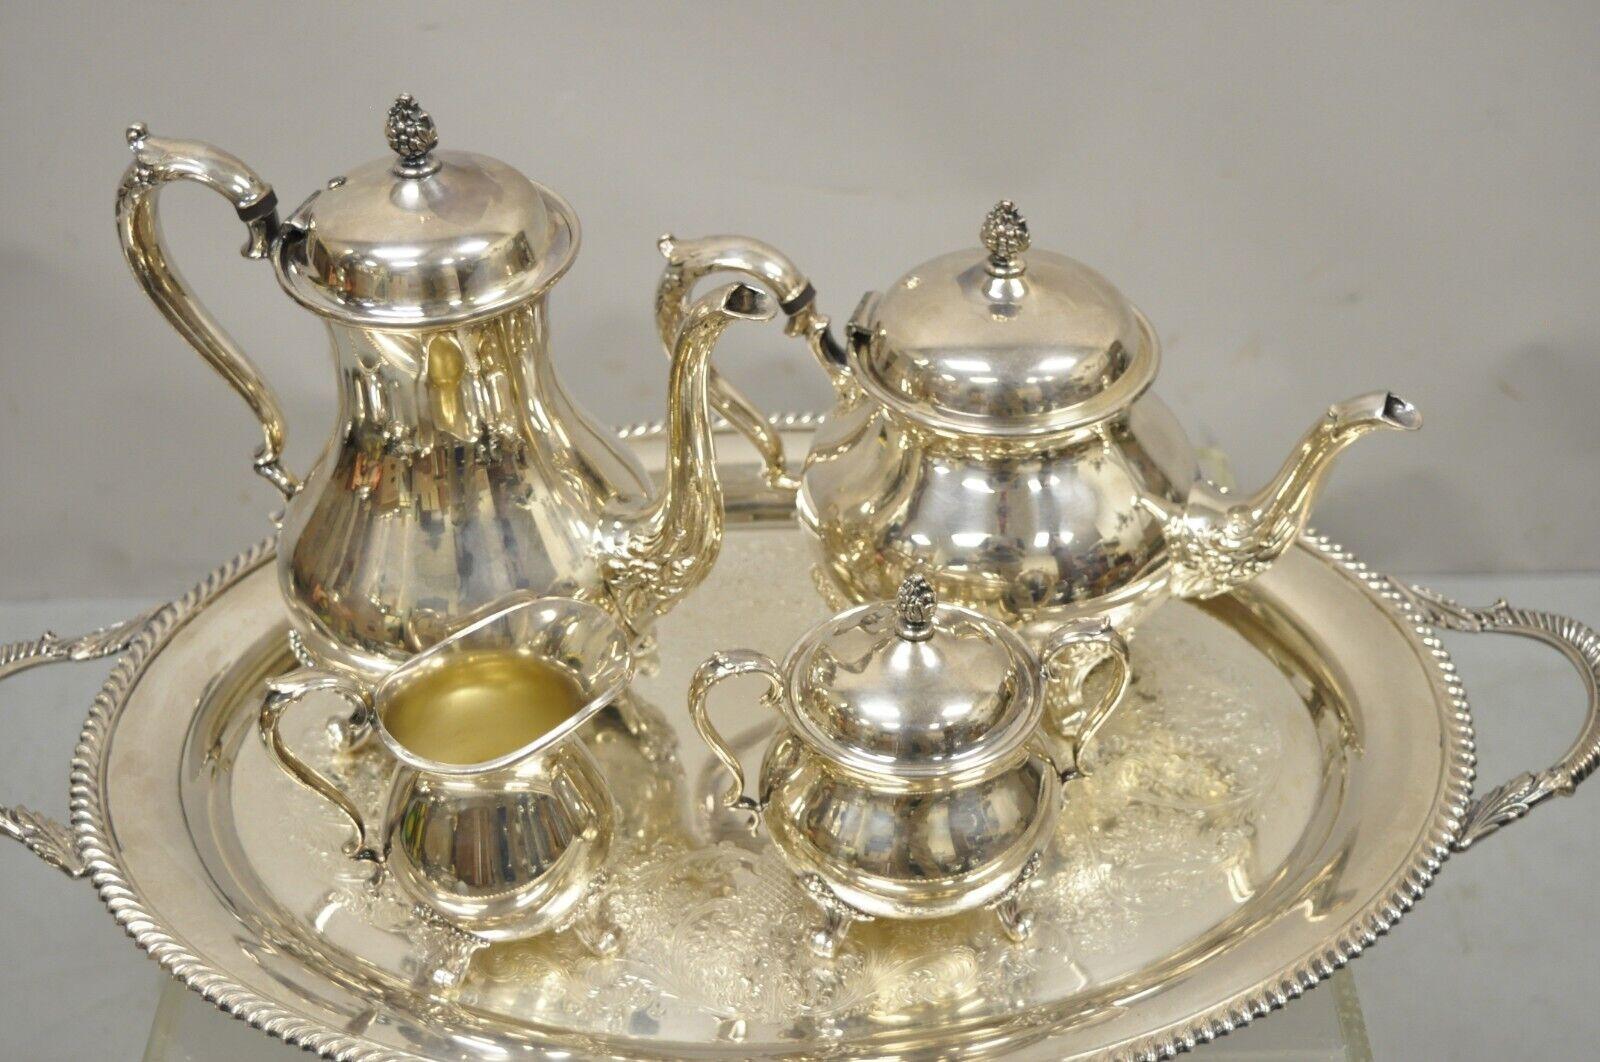 Wilcox International Silver Co Tea Set Serving Tray and More, 5 pc Set For Sale 3